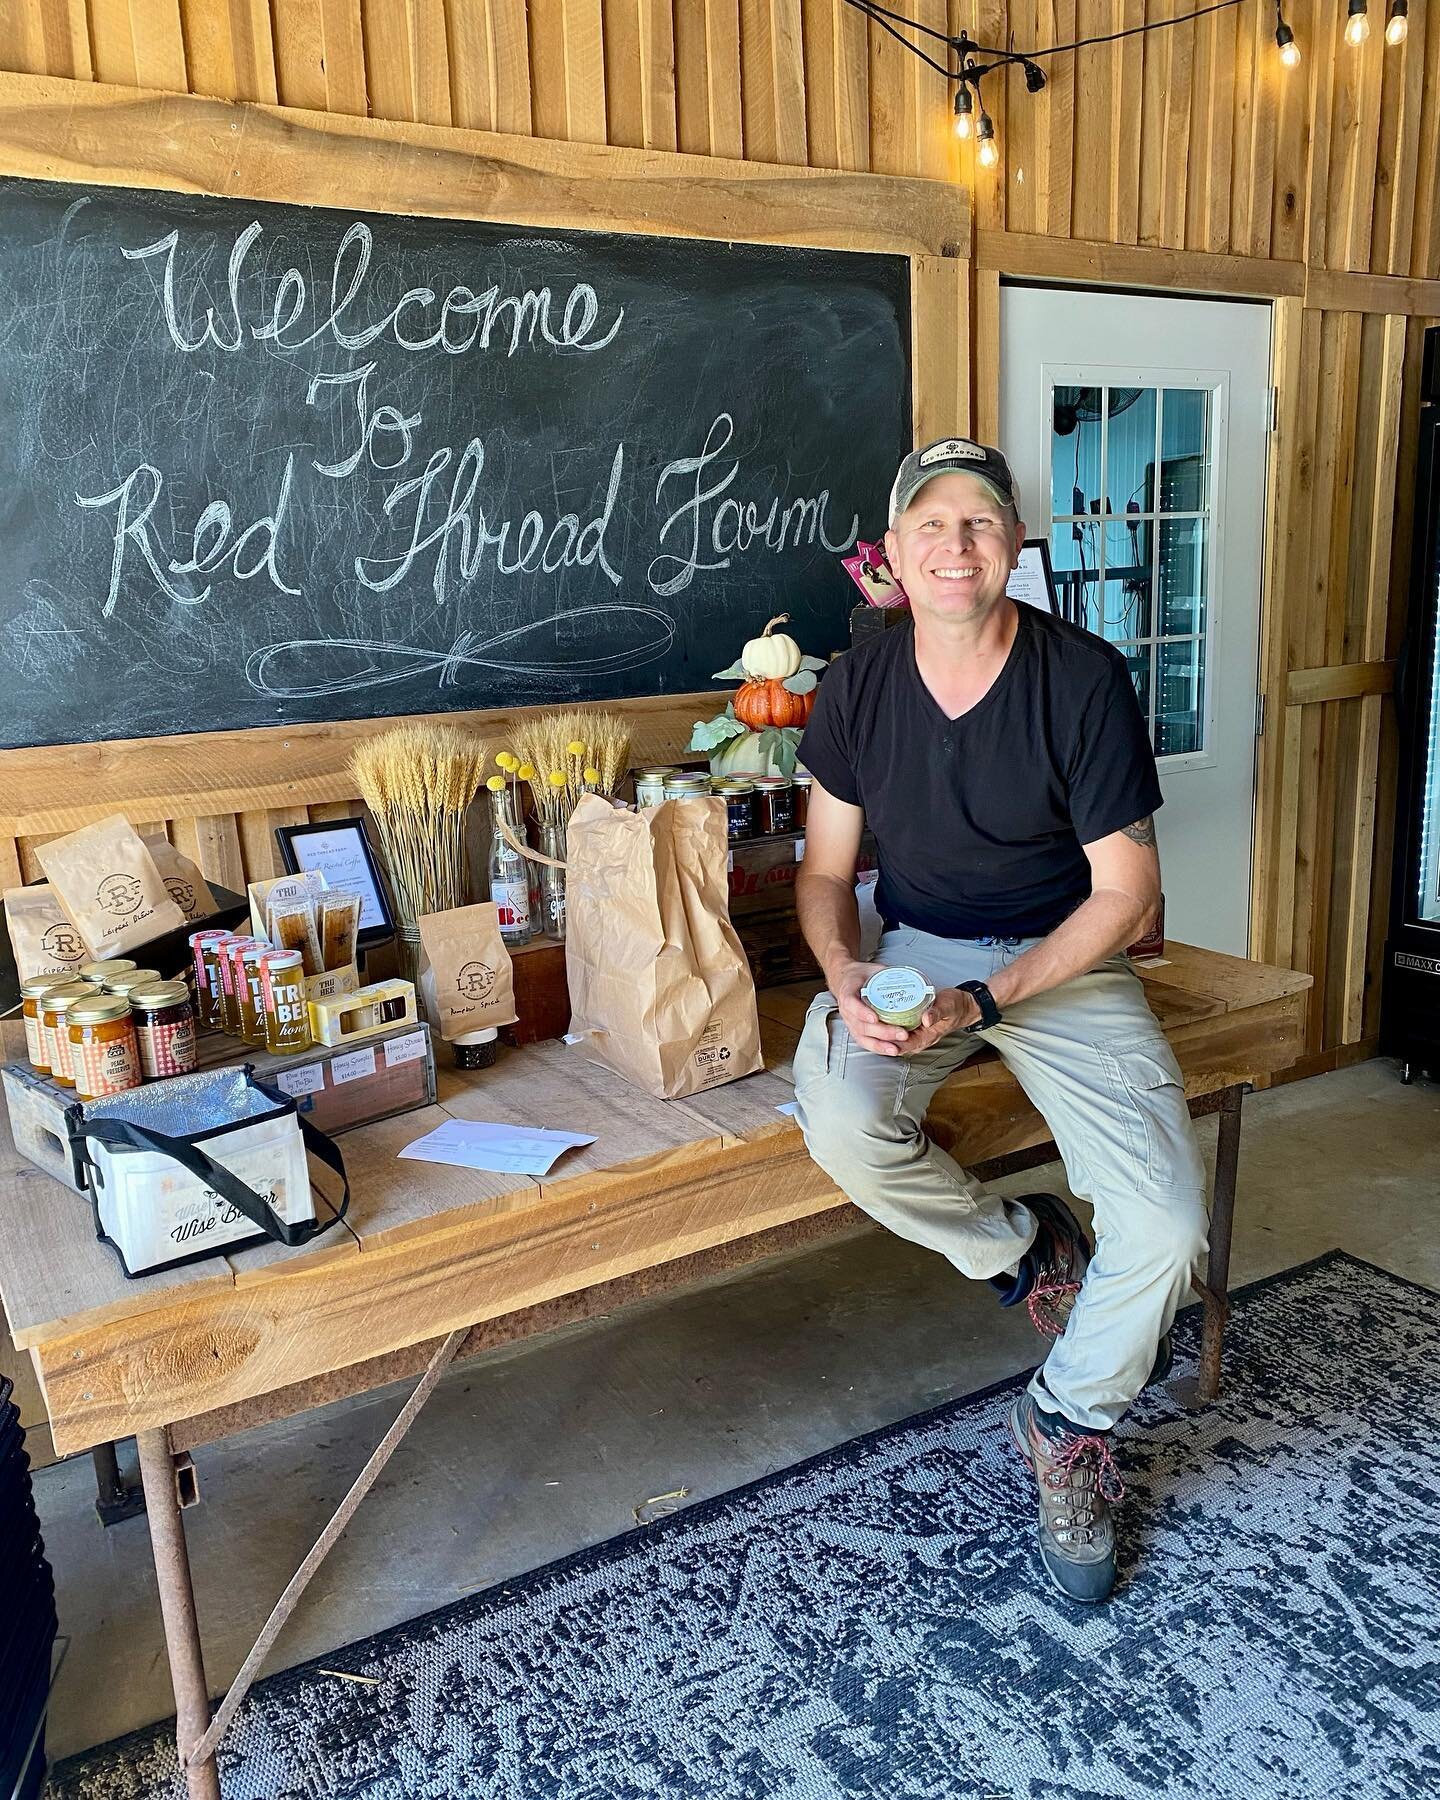 New stockist alert!
@redthreadfarm now stocks our flavors in Franklin, TN!

We&rsquo;ve also restocked the following locations for all your weekend butter needs:
@produceplace 
@nolohob 
@louisianafreshseafood 

If you&rsquo;re headed to @richlandpar